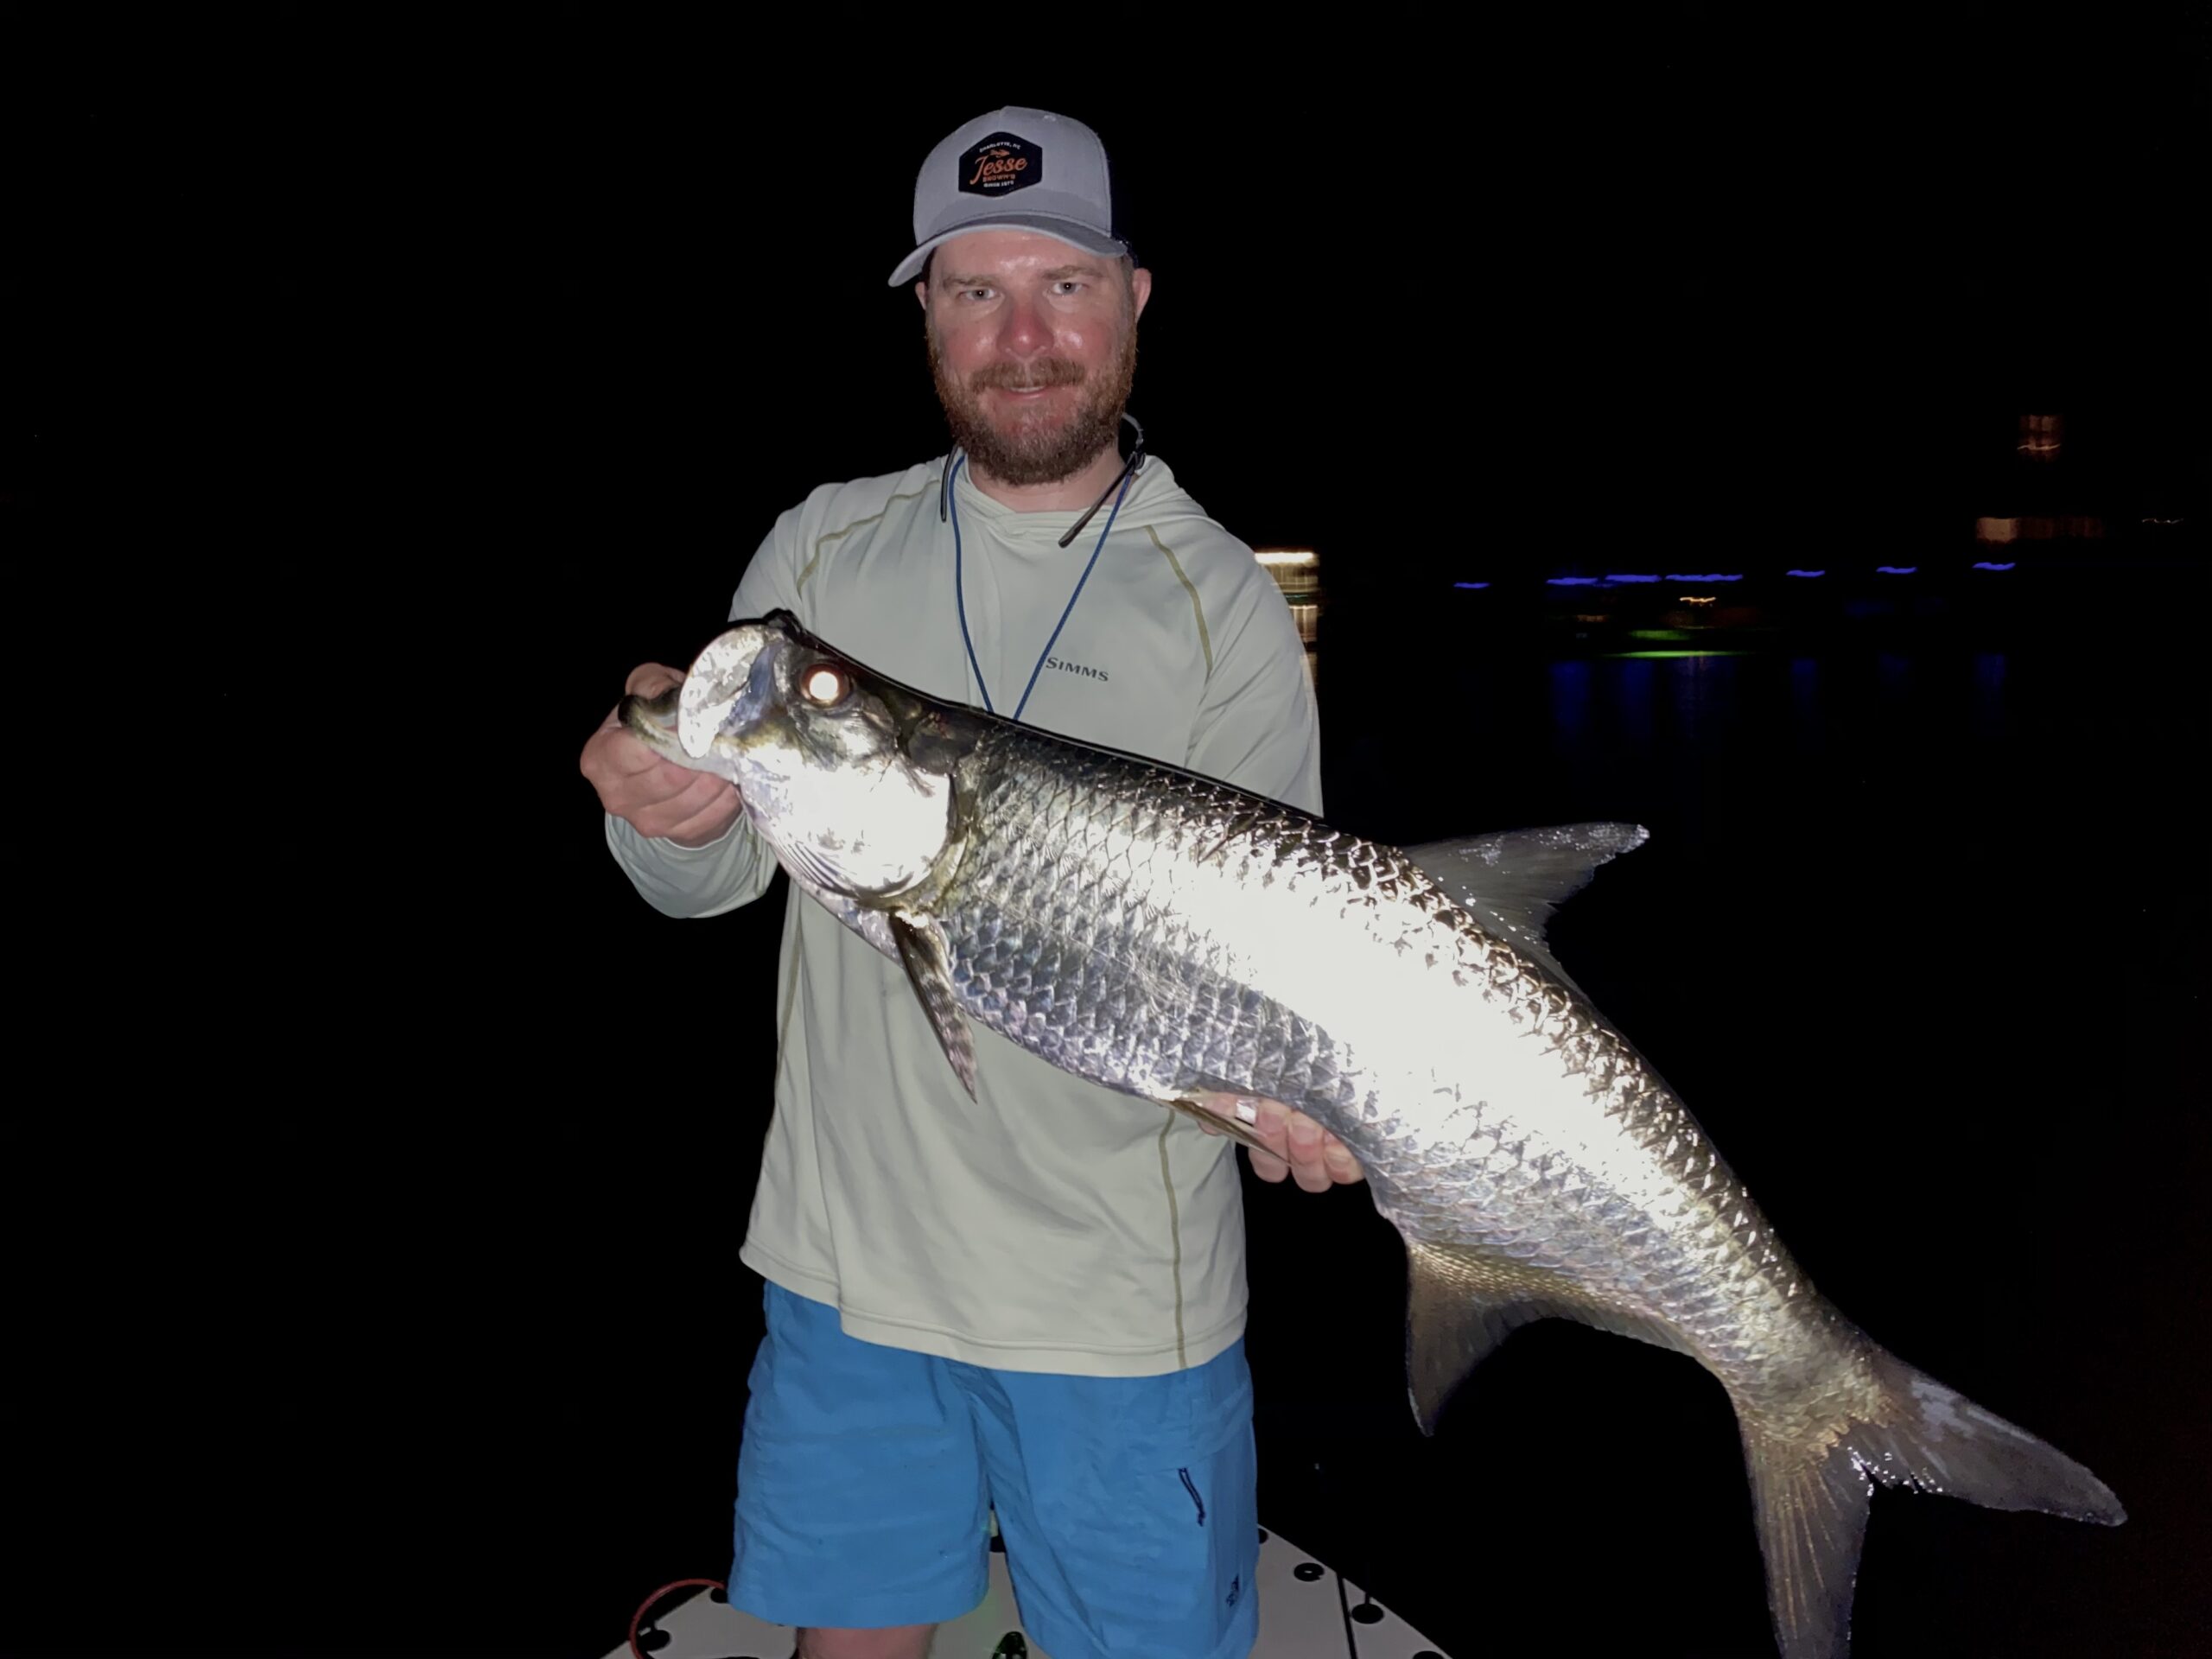 An angler holds a juvenile tarpon that he caught while fly fishing the dock lights